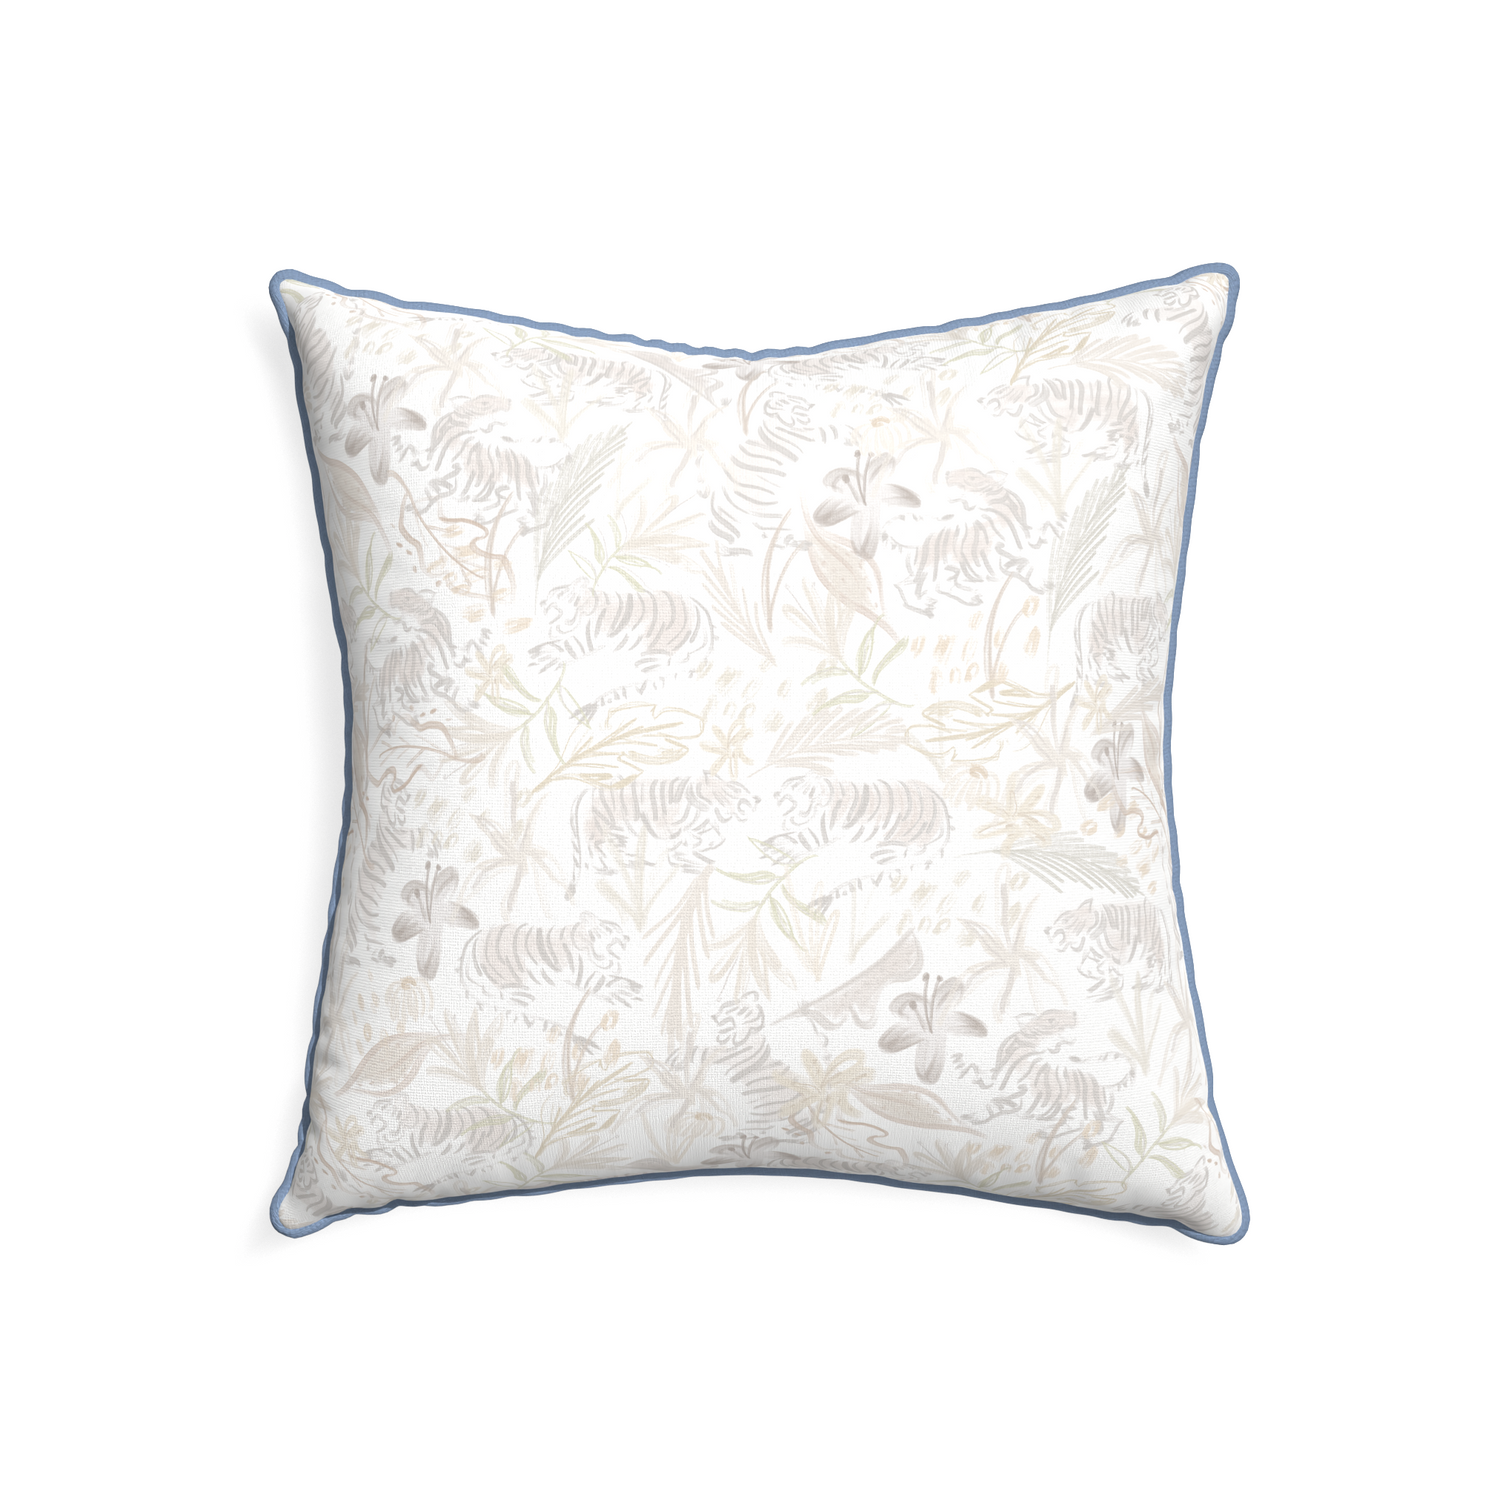 22-square frida sand custom pillow with sky piping on white background